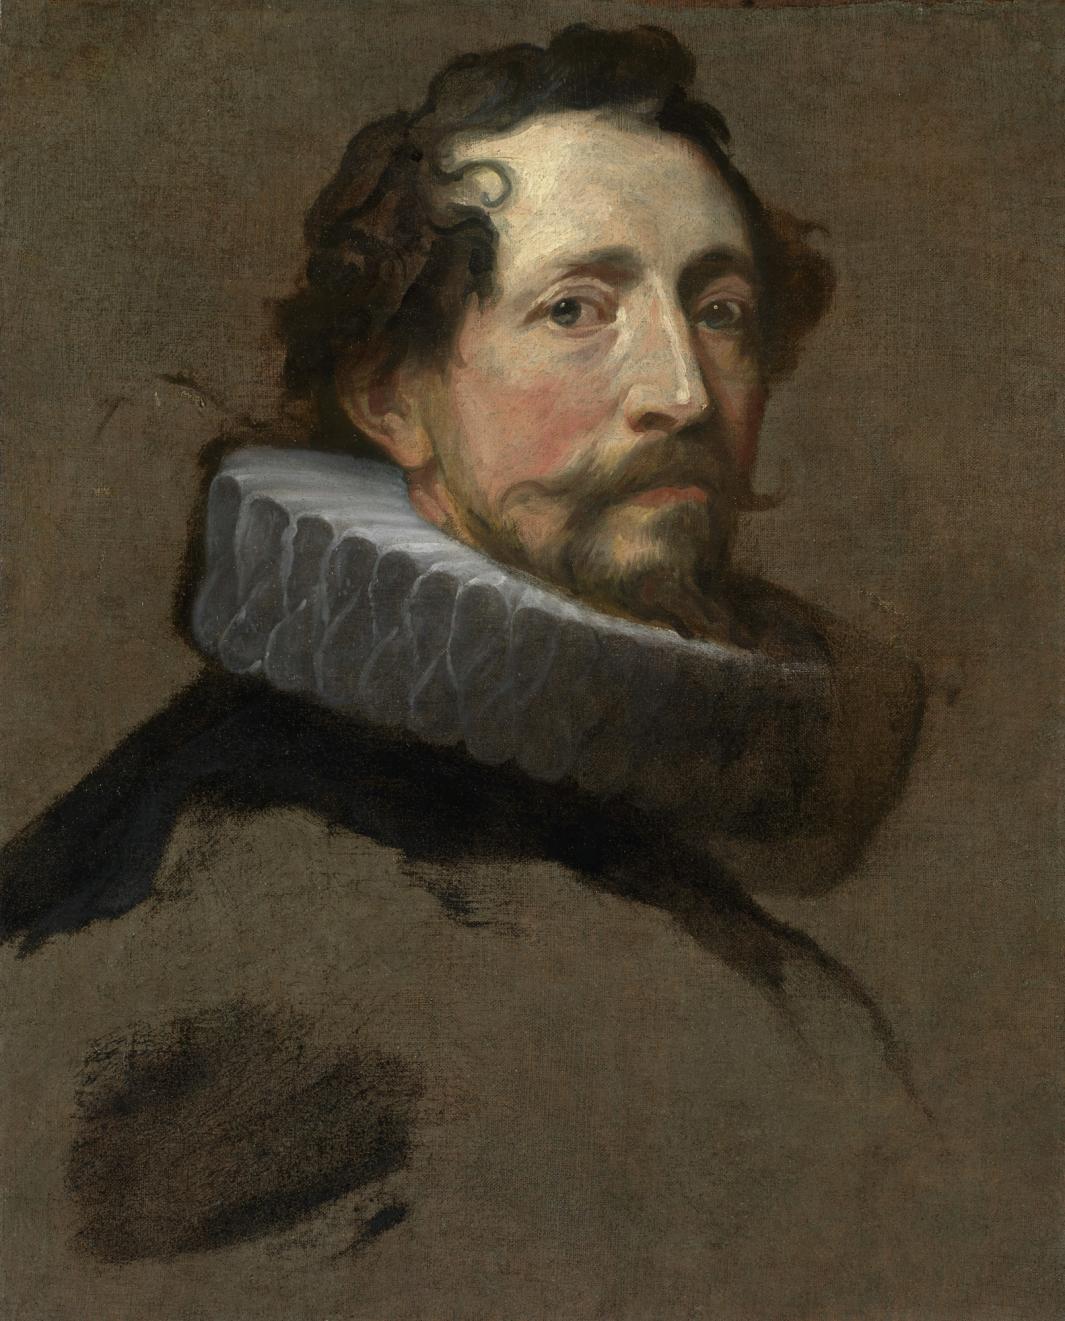 painting of man looking right, with beard and mustache, wearing white stiff collar